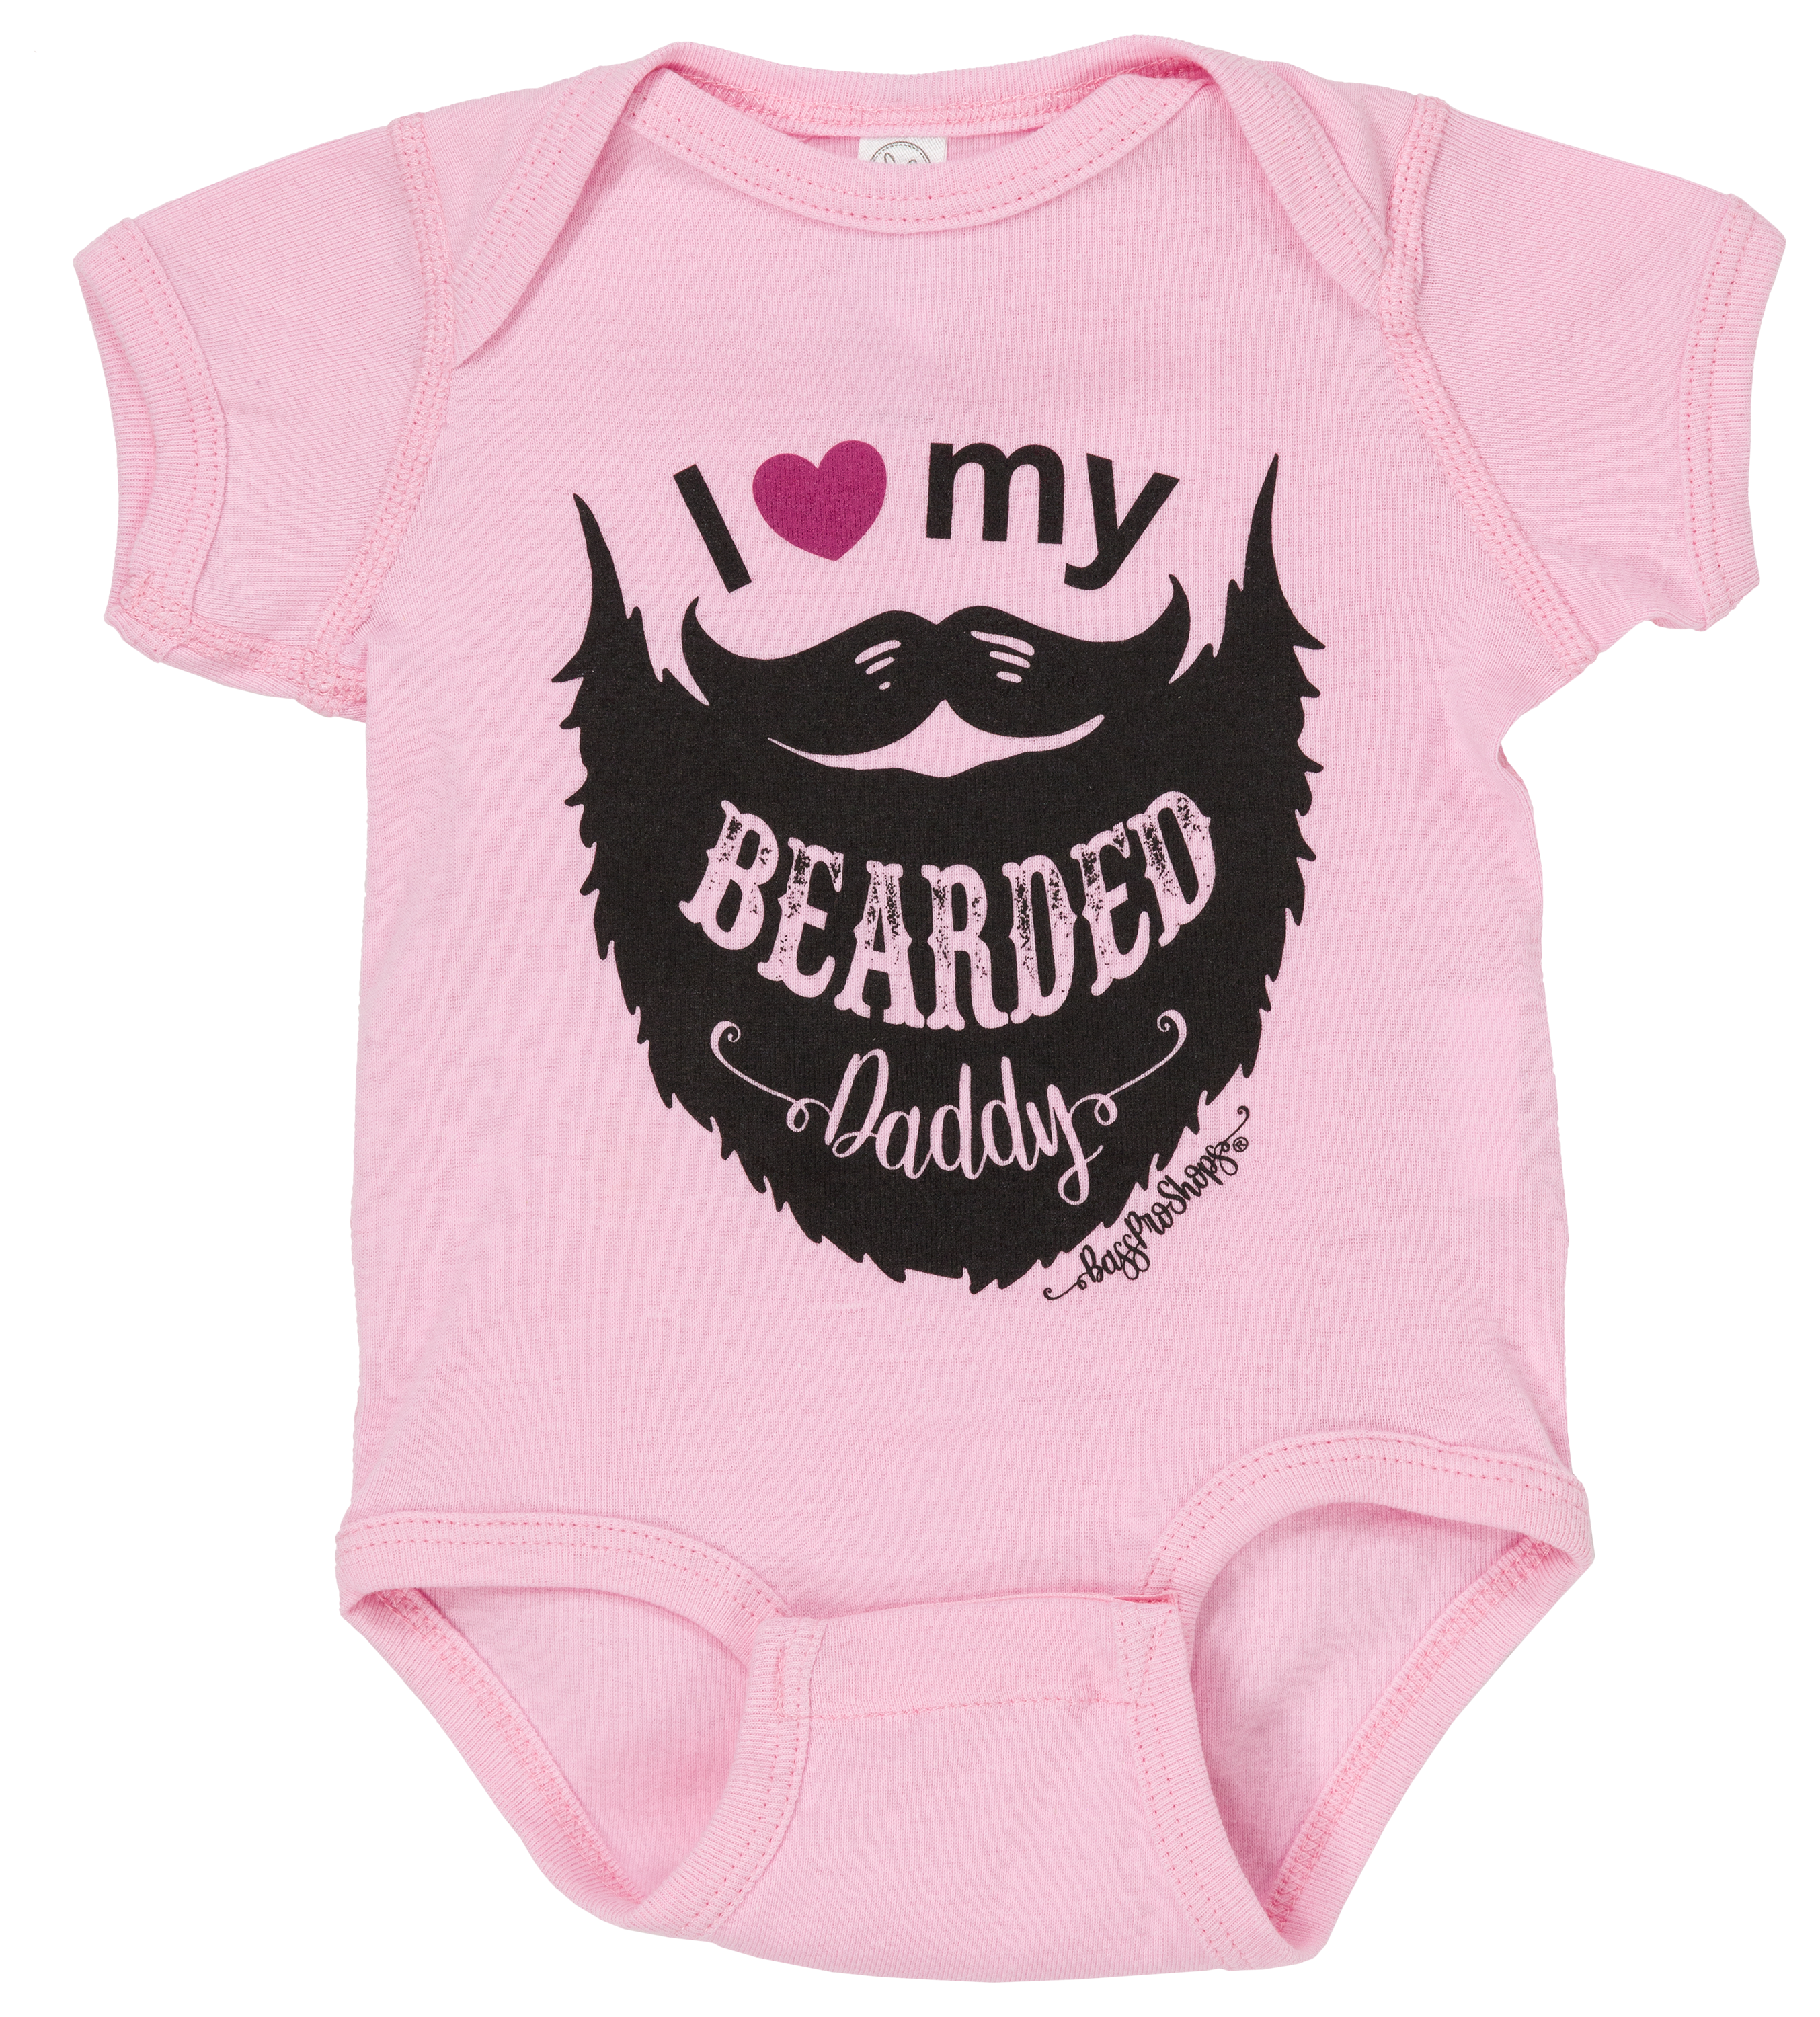 Bass Pro Shops I Heart My Bearded Daddy Short-Sleeve Bodysuit for Babies - Pink - 12 Months